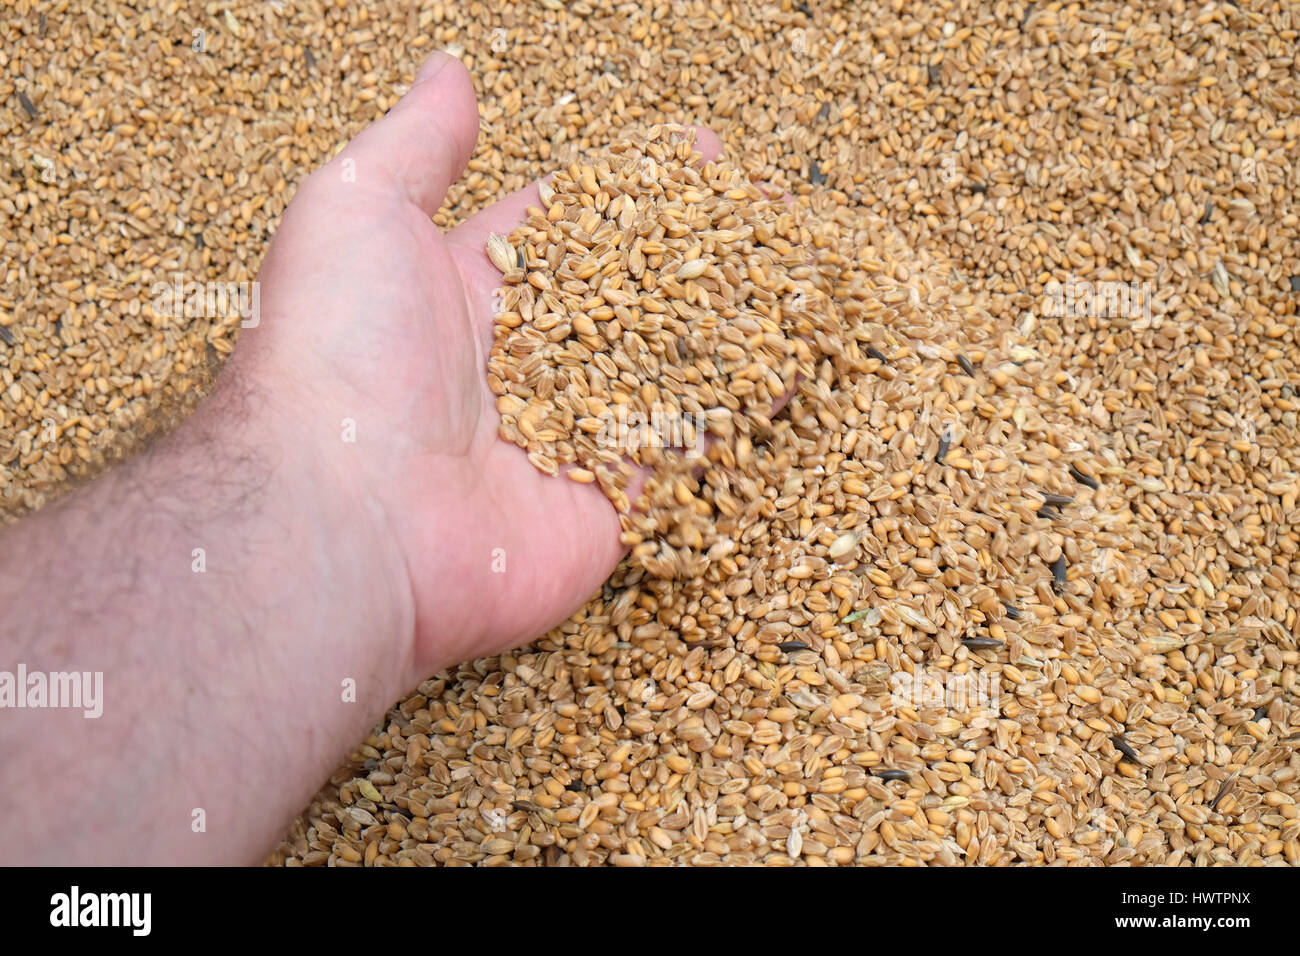 Hand holding golden wheat seed Stock Photo